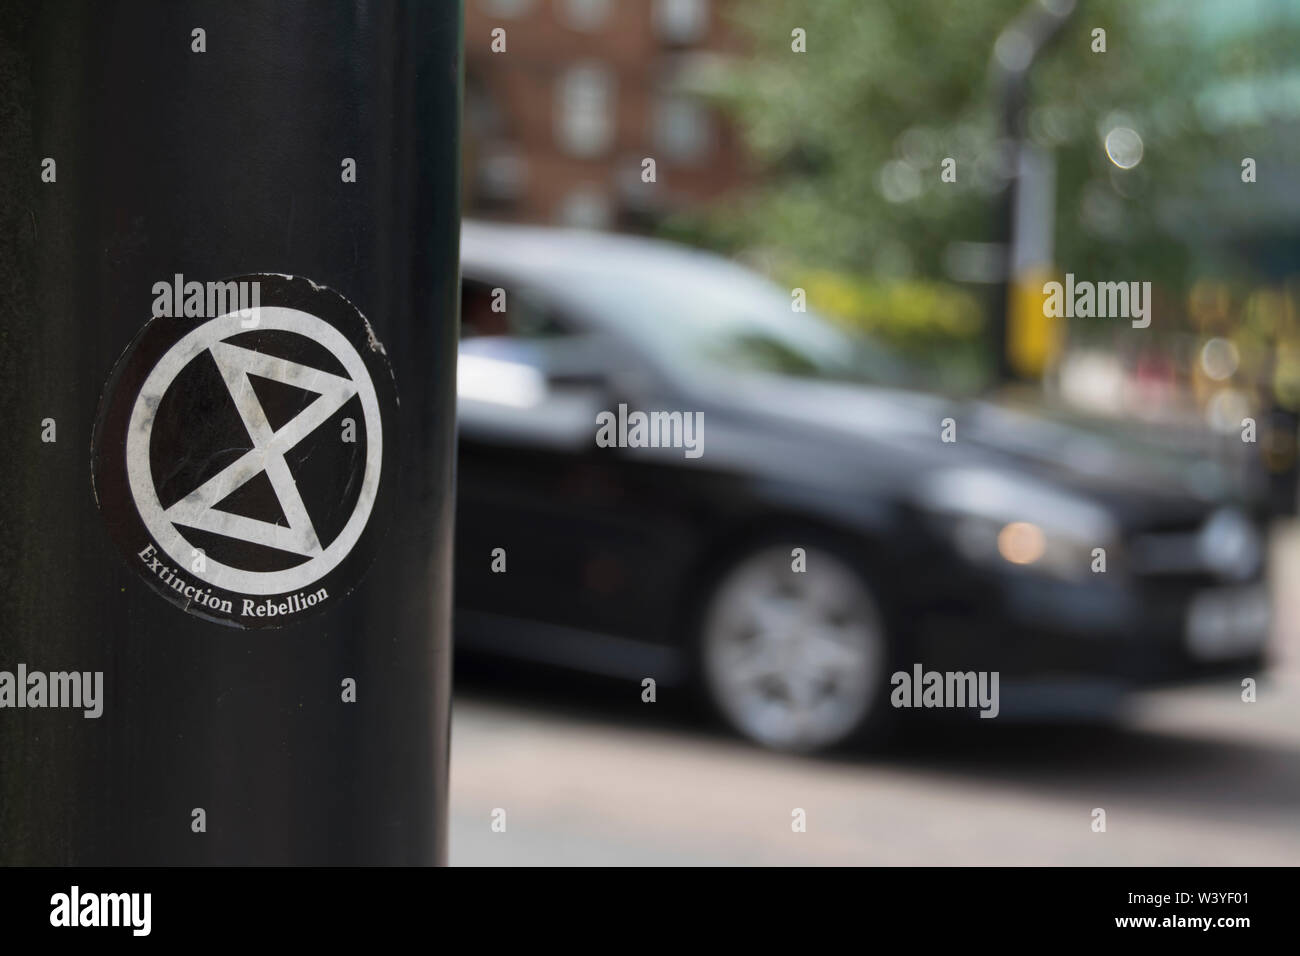 extinction rebellion sticker with logo with passing car seen in blured motion, in putney, london, england Stock Photo